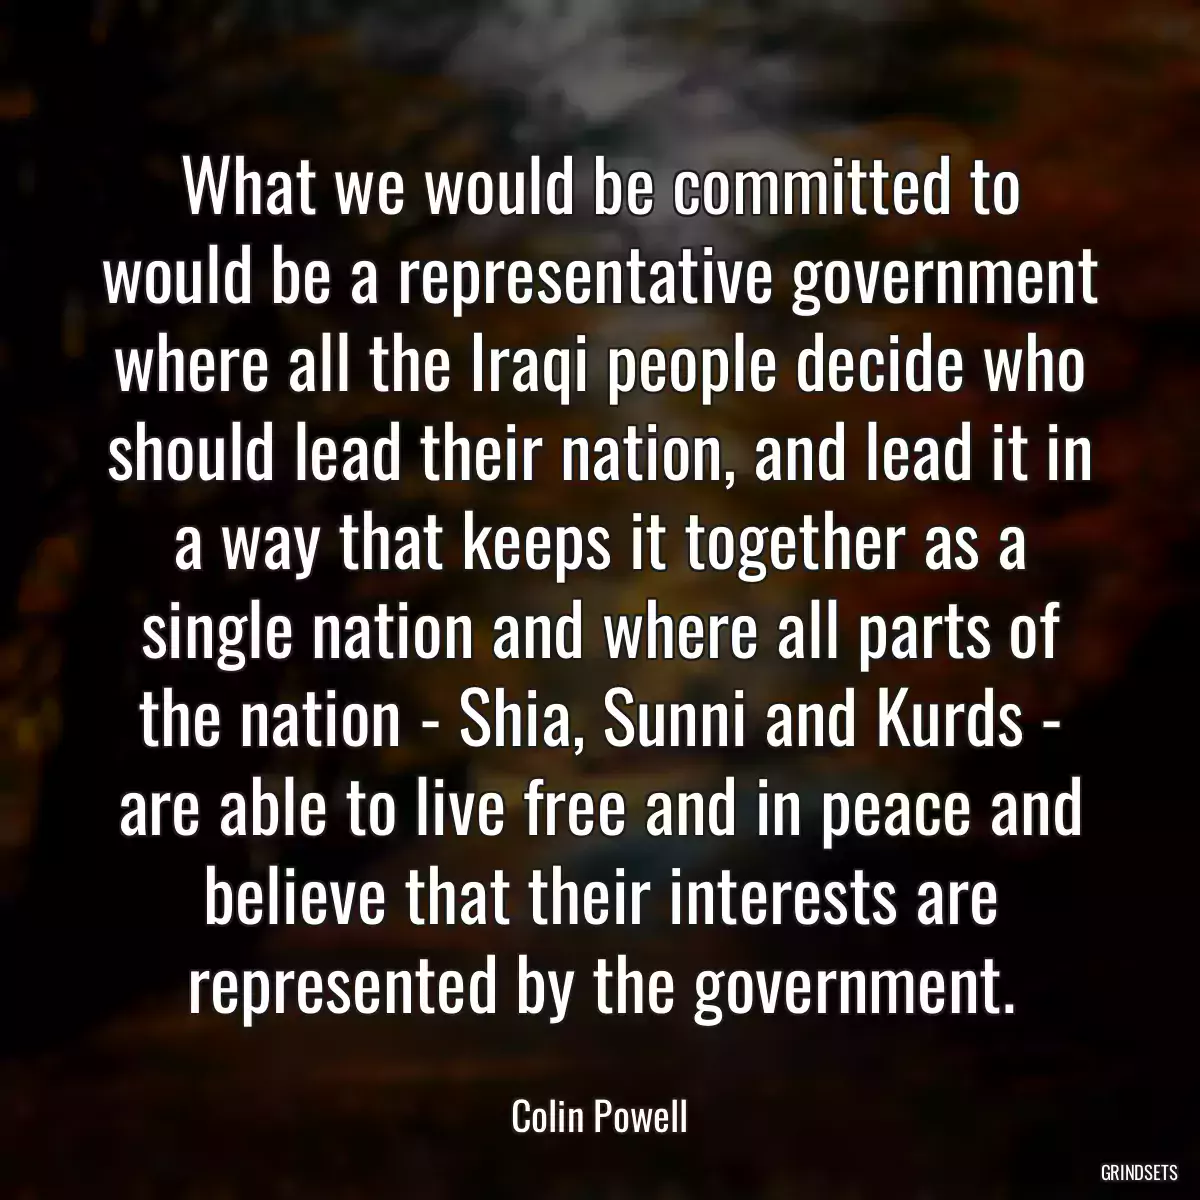 What we would be committed to would be a representative government where all the Iraqi people decide who should lead their nation, and lead it in a way that keeps it together as a single nation and where all parts of the nation - Shia, Sunni and Kurds - are able to live free and in peace and believe that their interests are represented by the government.